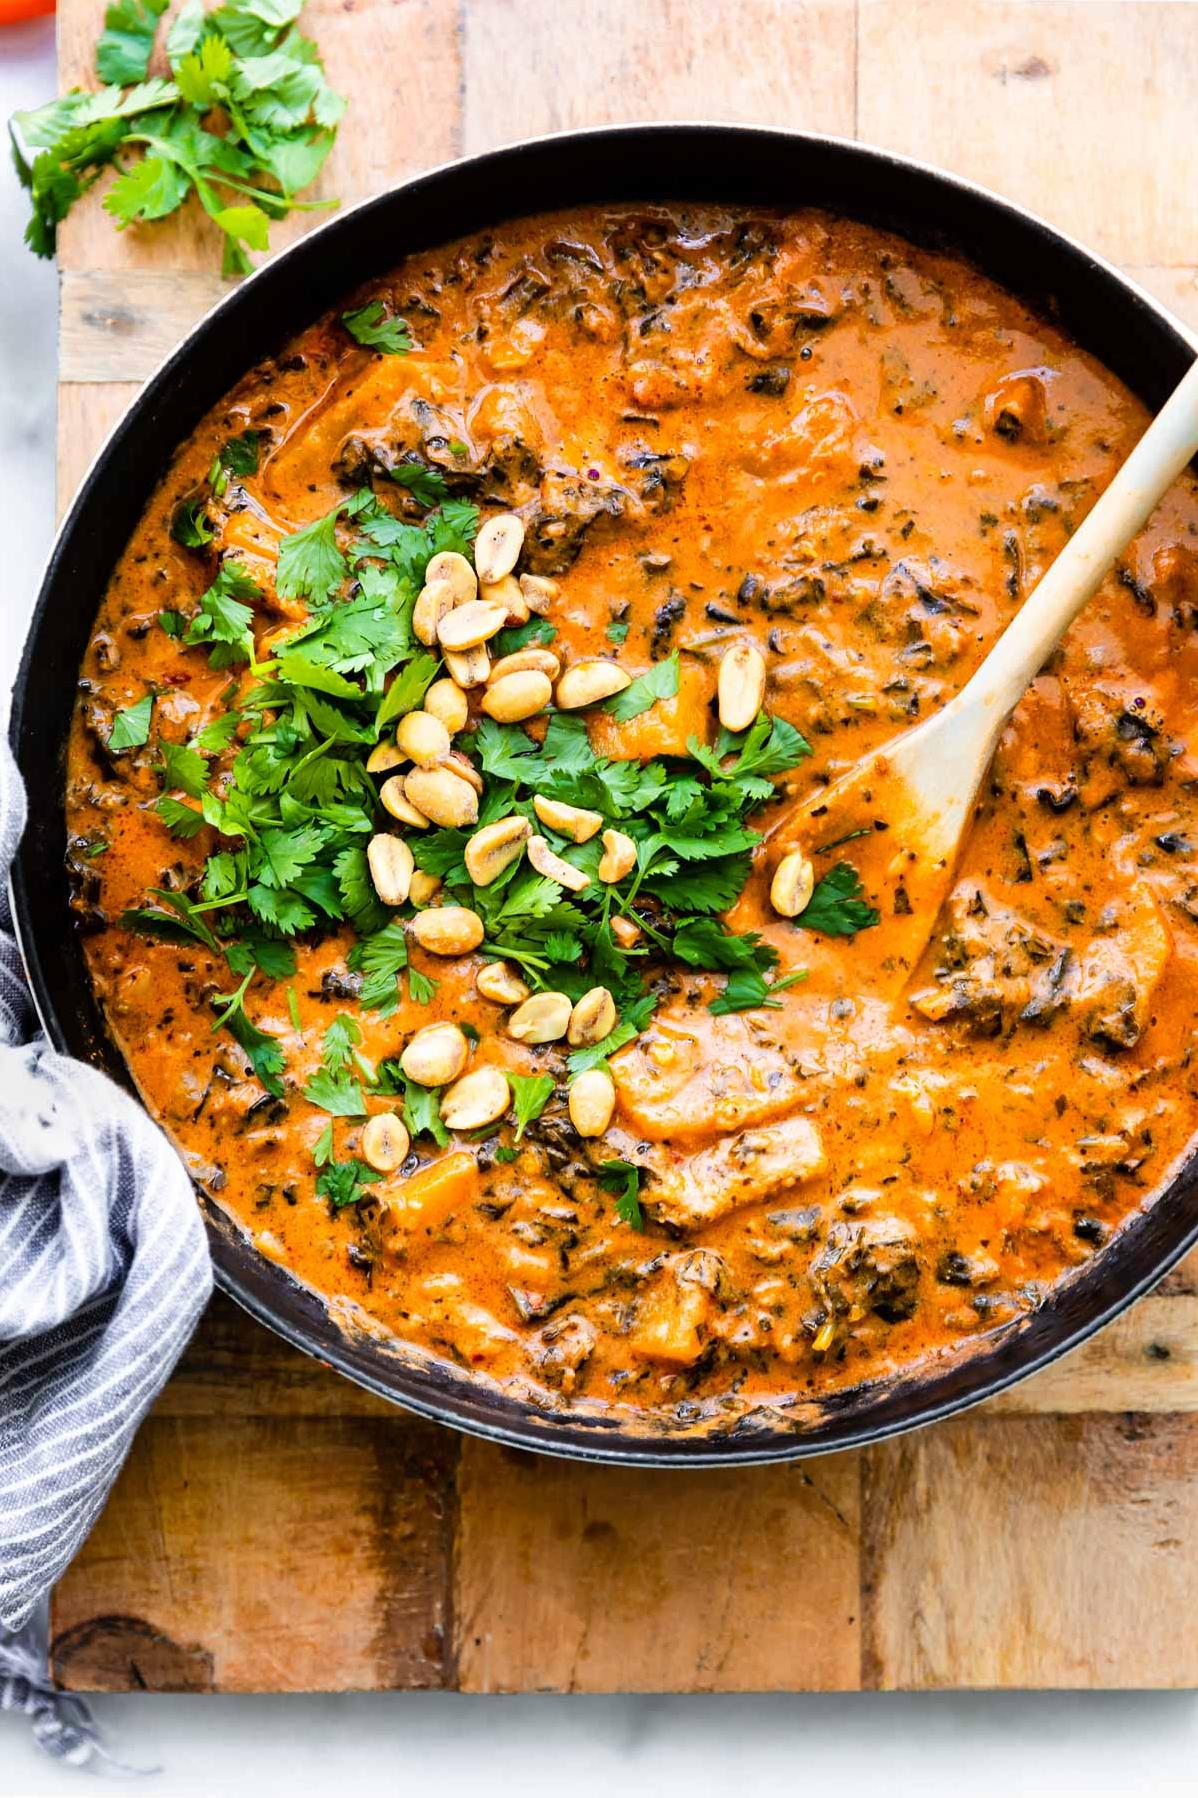  Each forkful of this Scd and gluten-free stew is packed with flavor and nutrition.